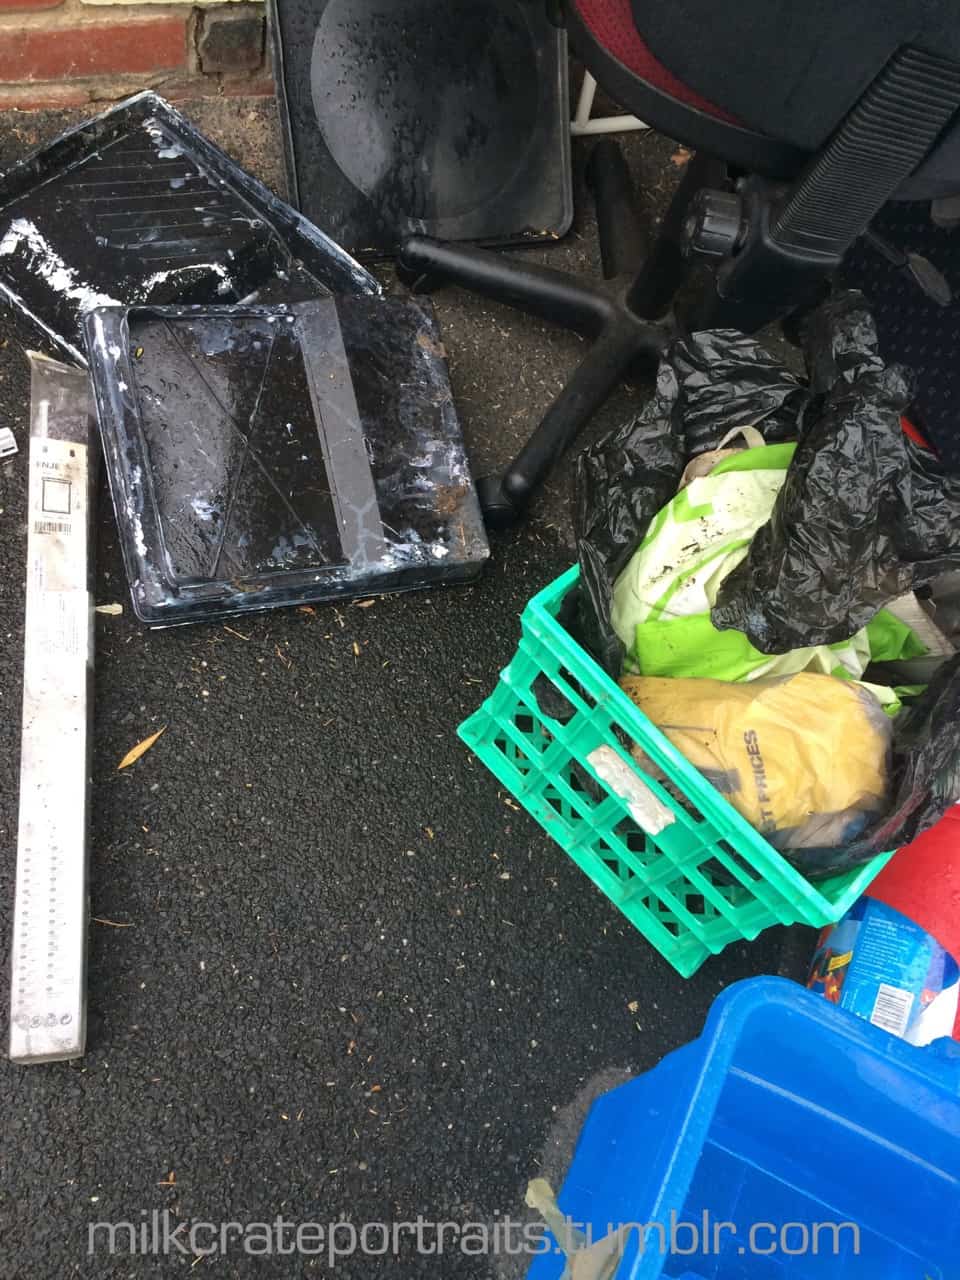 Dumped with the rubbish